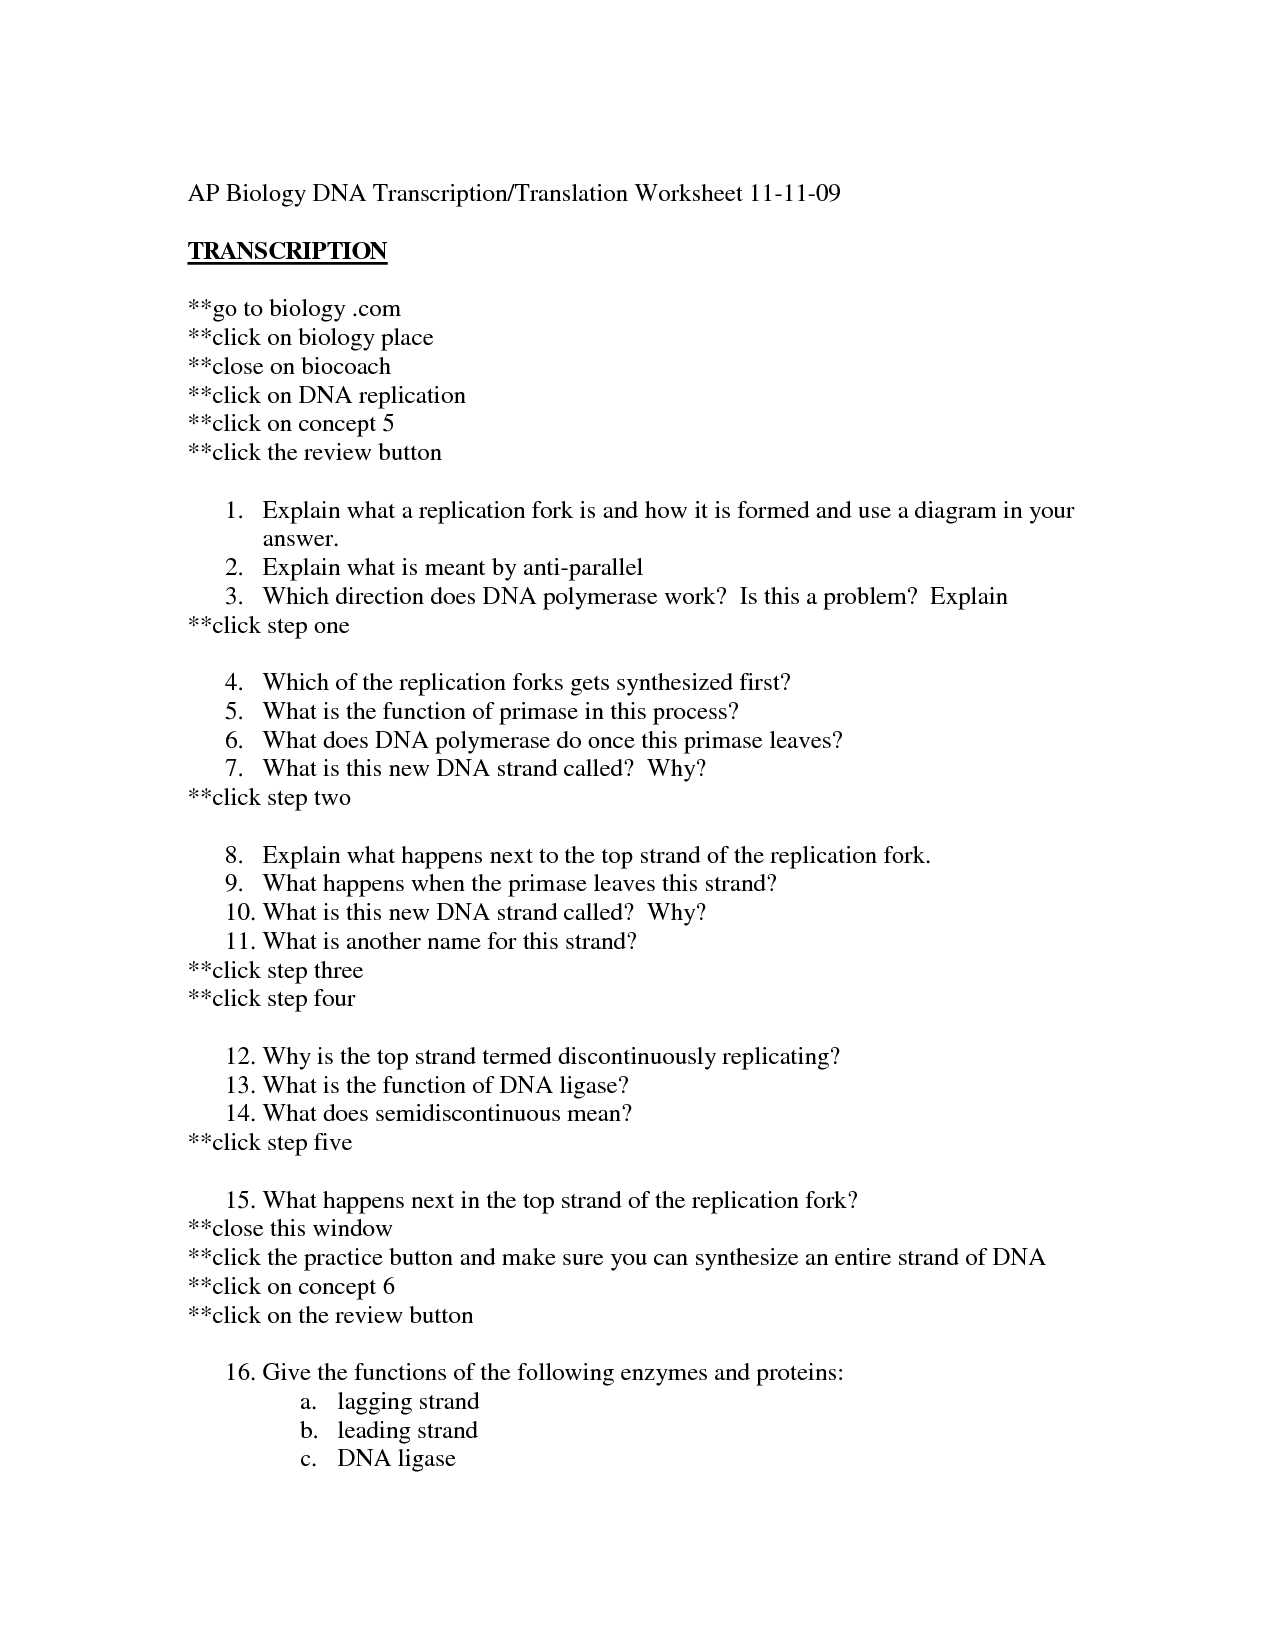 Dna Replication and Rna Transcription Worksheet Answers together with Dna the Molecule Heredity Worksheet Answers the Best Worksheets